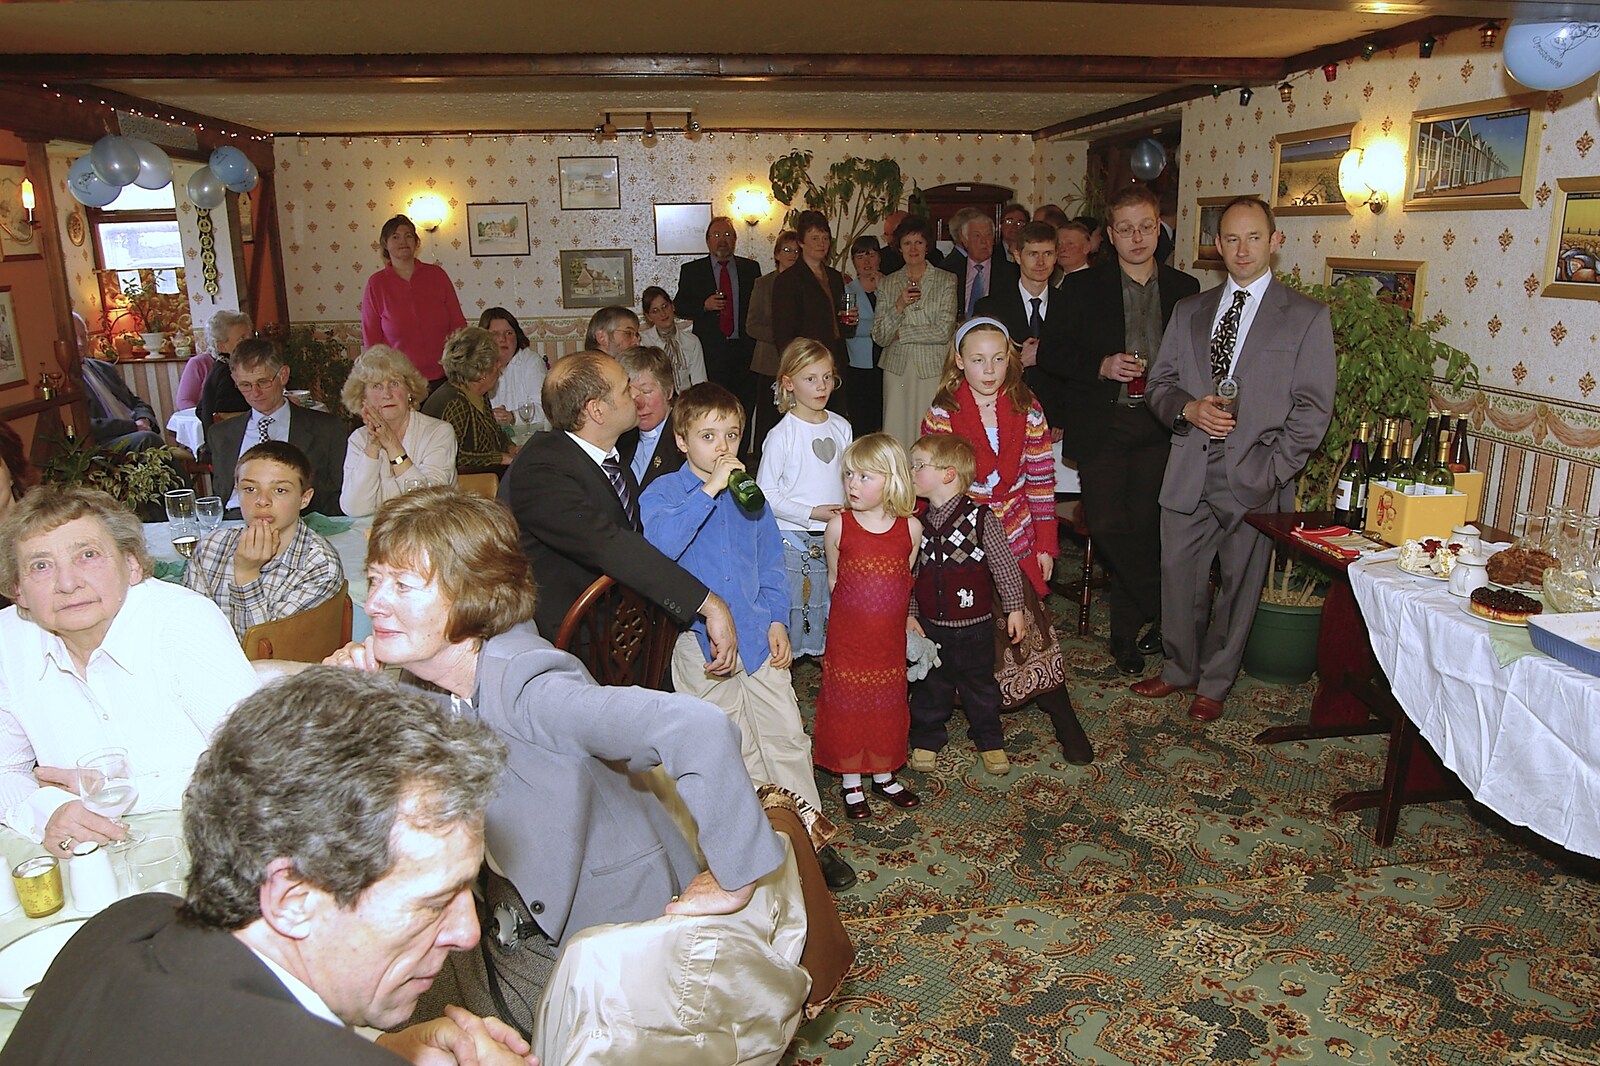 A room-full of onlookers from Clairesprog Christening, Church of St. Margaret of Antioch, Thrandeston, Suffolk - 19th March 2006